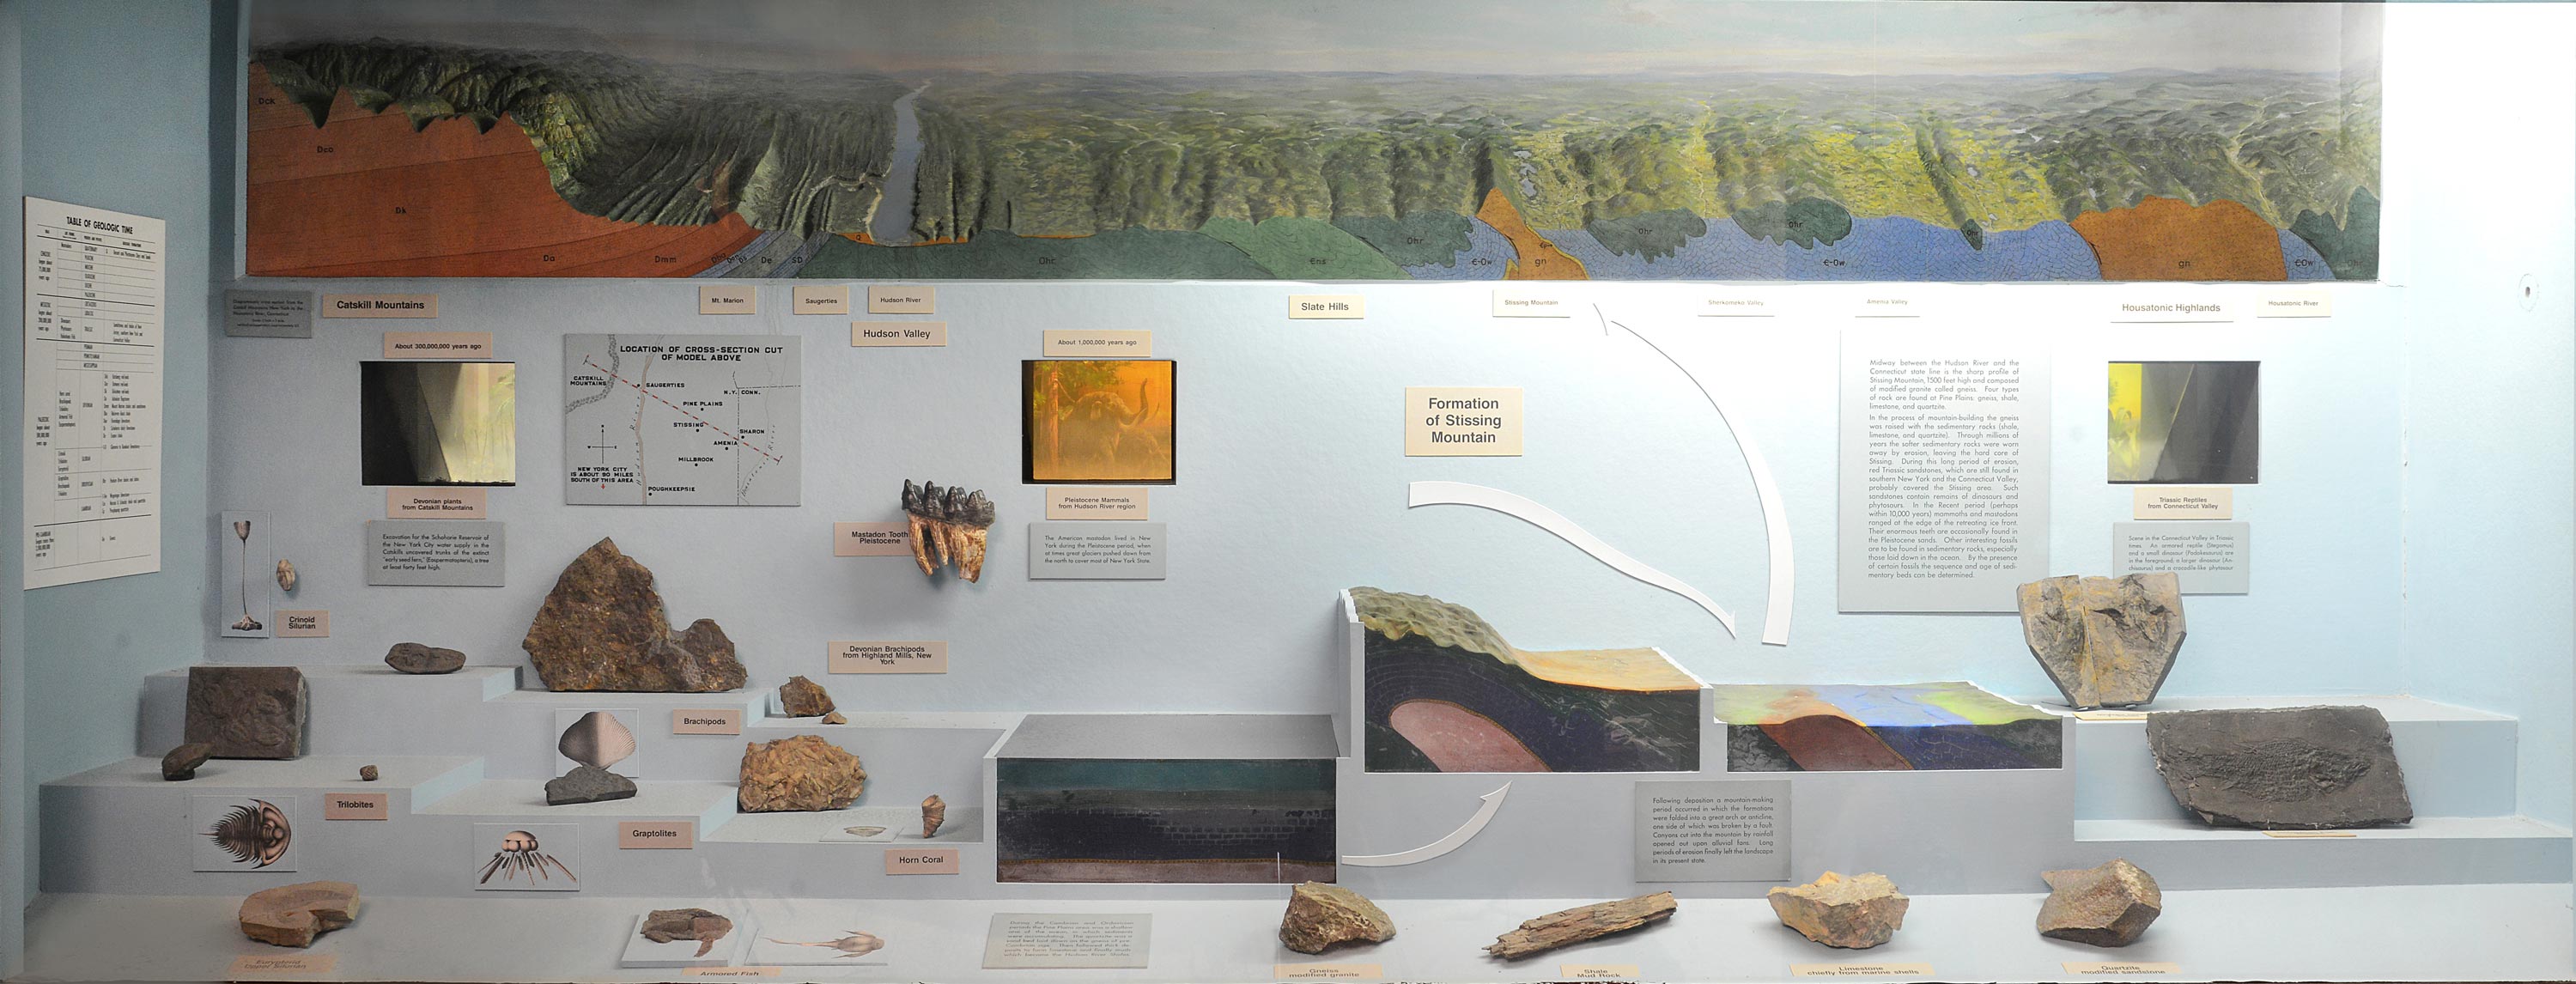 Museum case showing fossils illustrations and models explaining the geological structure of Stissing Mountain